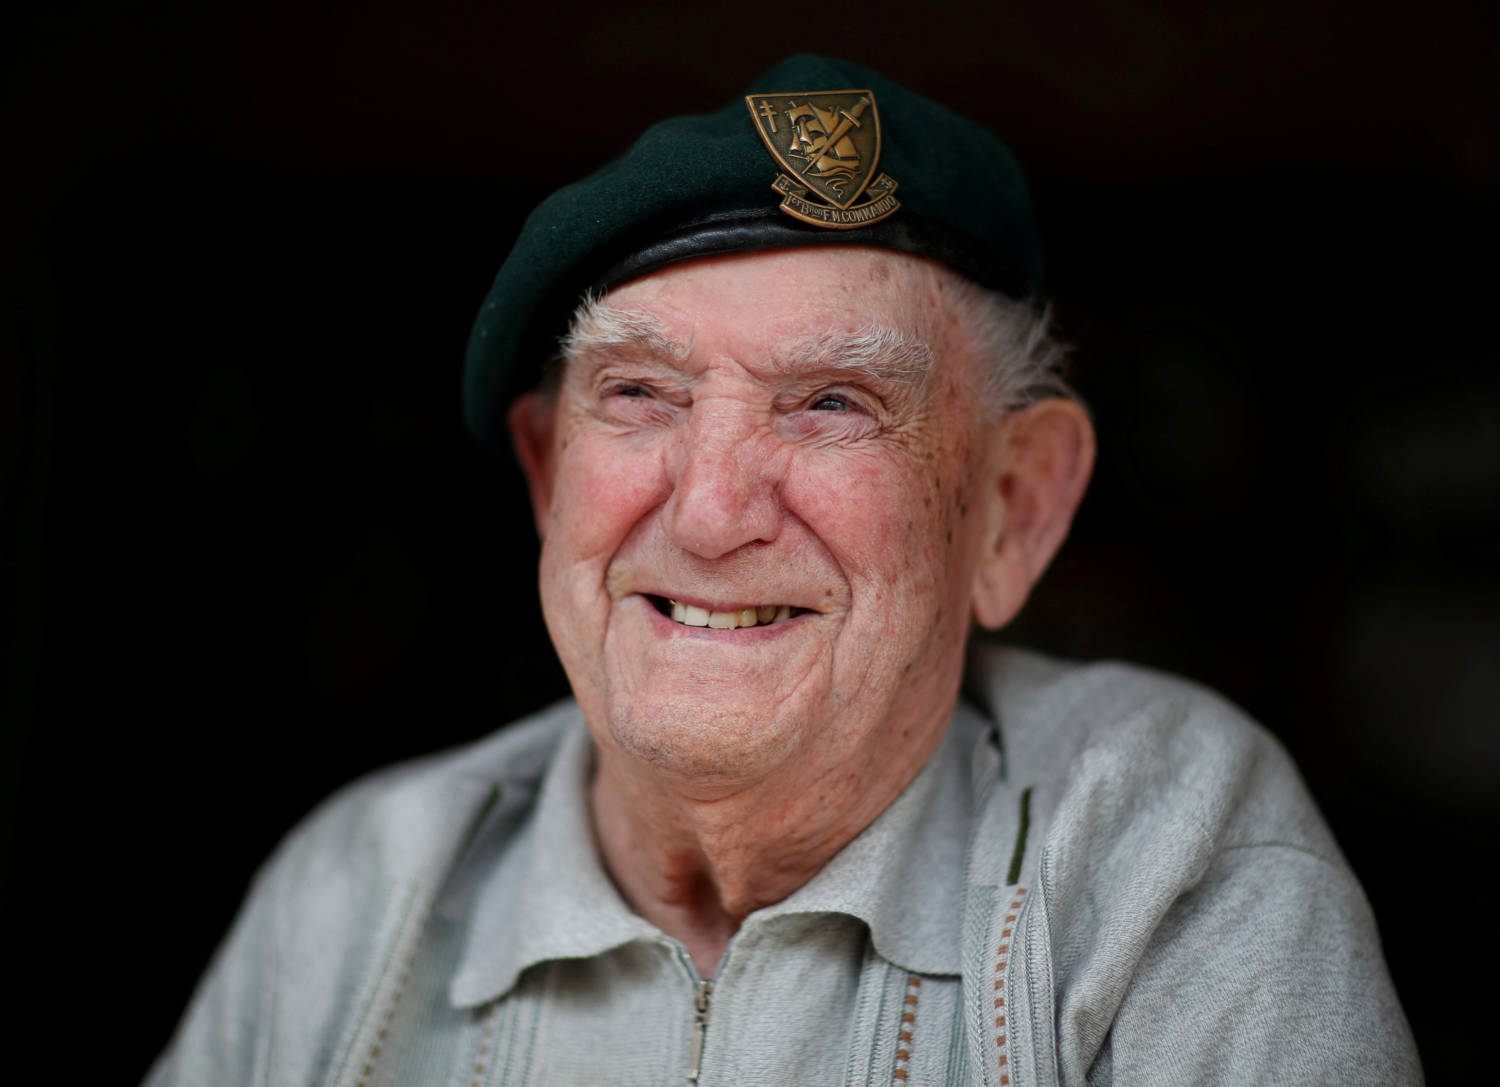 File Photo: Former Member Of French Captain Philippe Kieffer's Green Berets Commando Leon Gautier, 96 Years Old, Attends An Interview With Reuters In Ouistreham